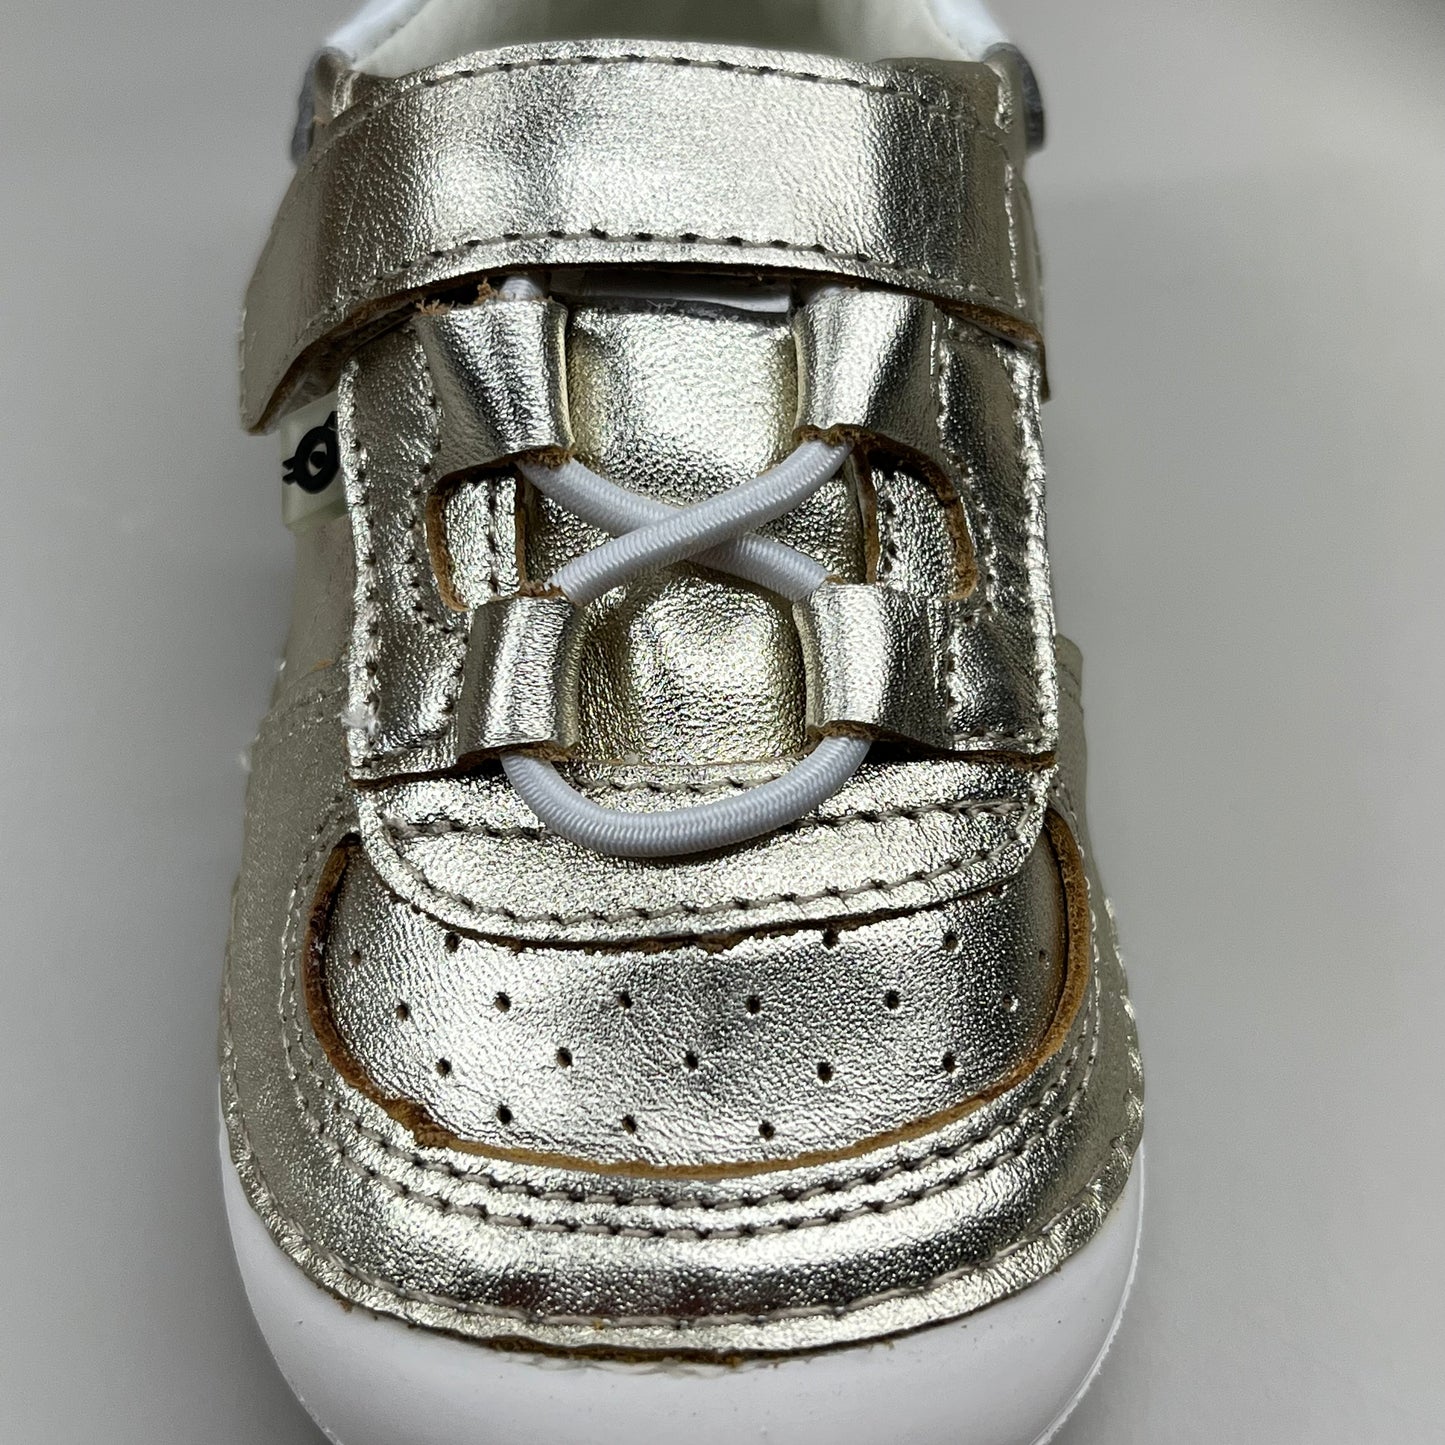 OLD SOLES Baby Rebel Pave Leather Shoe Sz 23 US 7 Gold/White #4090